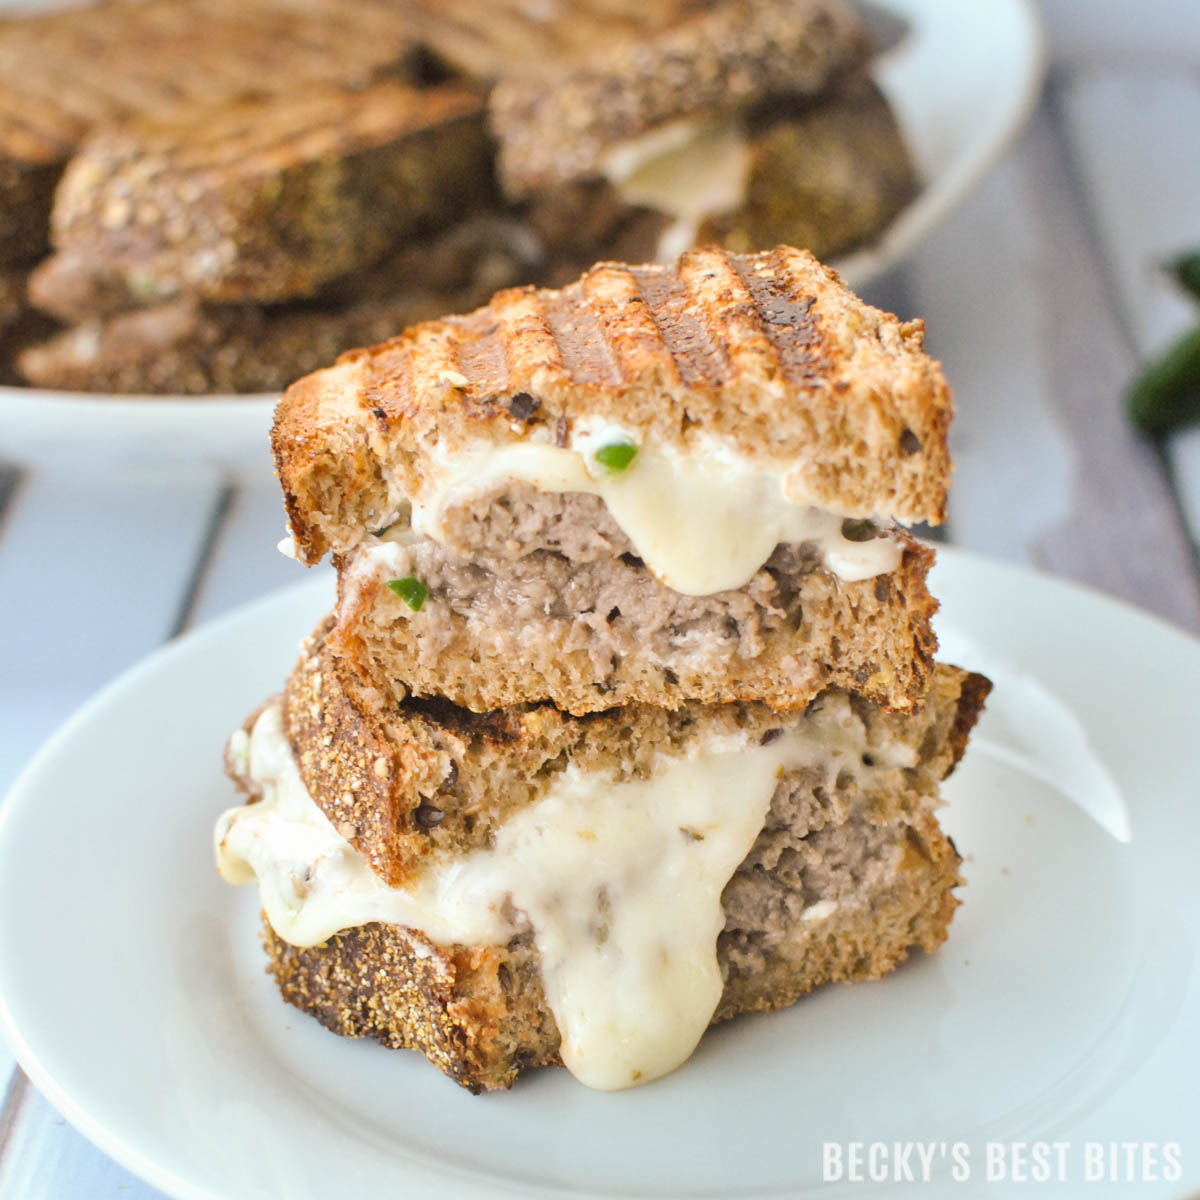 Jalapeño Popper Patty Melt feature jalapenos, cream cheese, greek yogurt, parmesan cheese, whole grain bread, beef & melty cheese for a quick lunch or dinner recipe that guys on the go can enjoy! | beckysbestbites.com